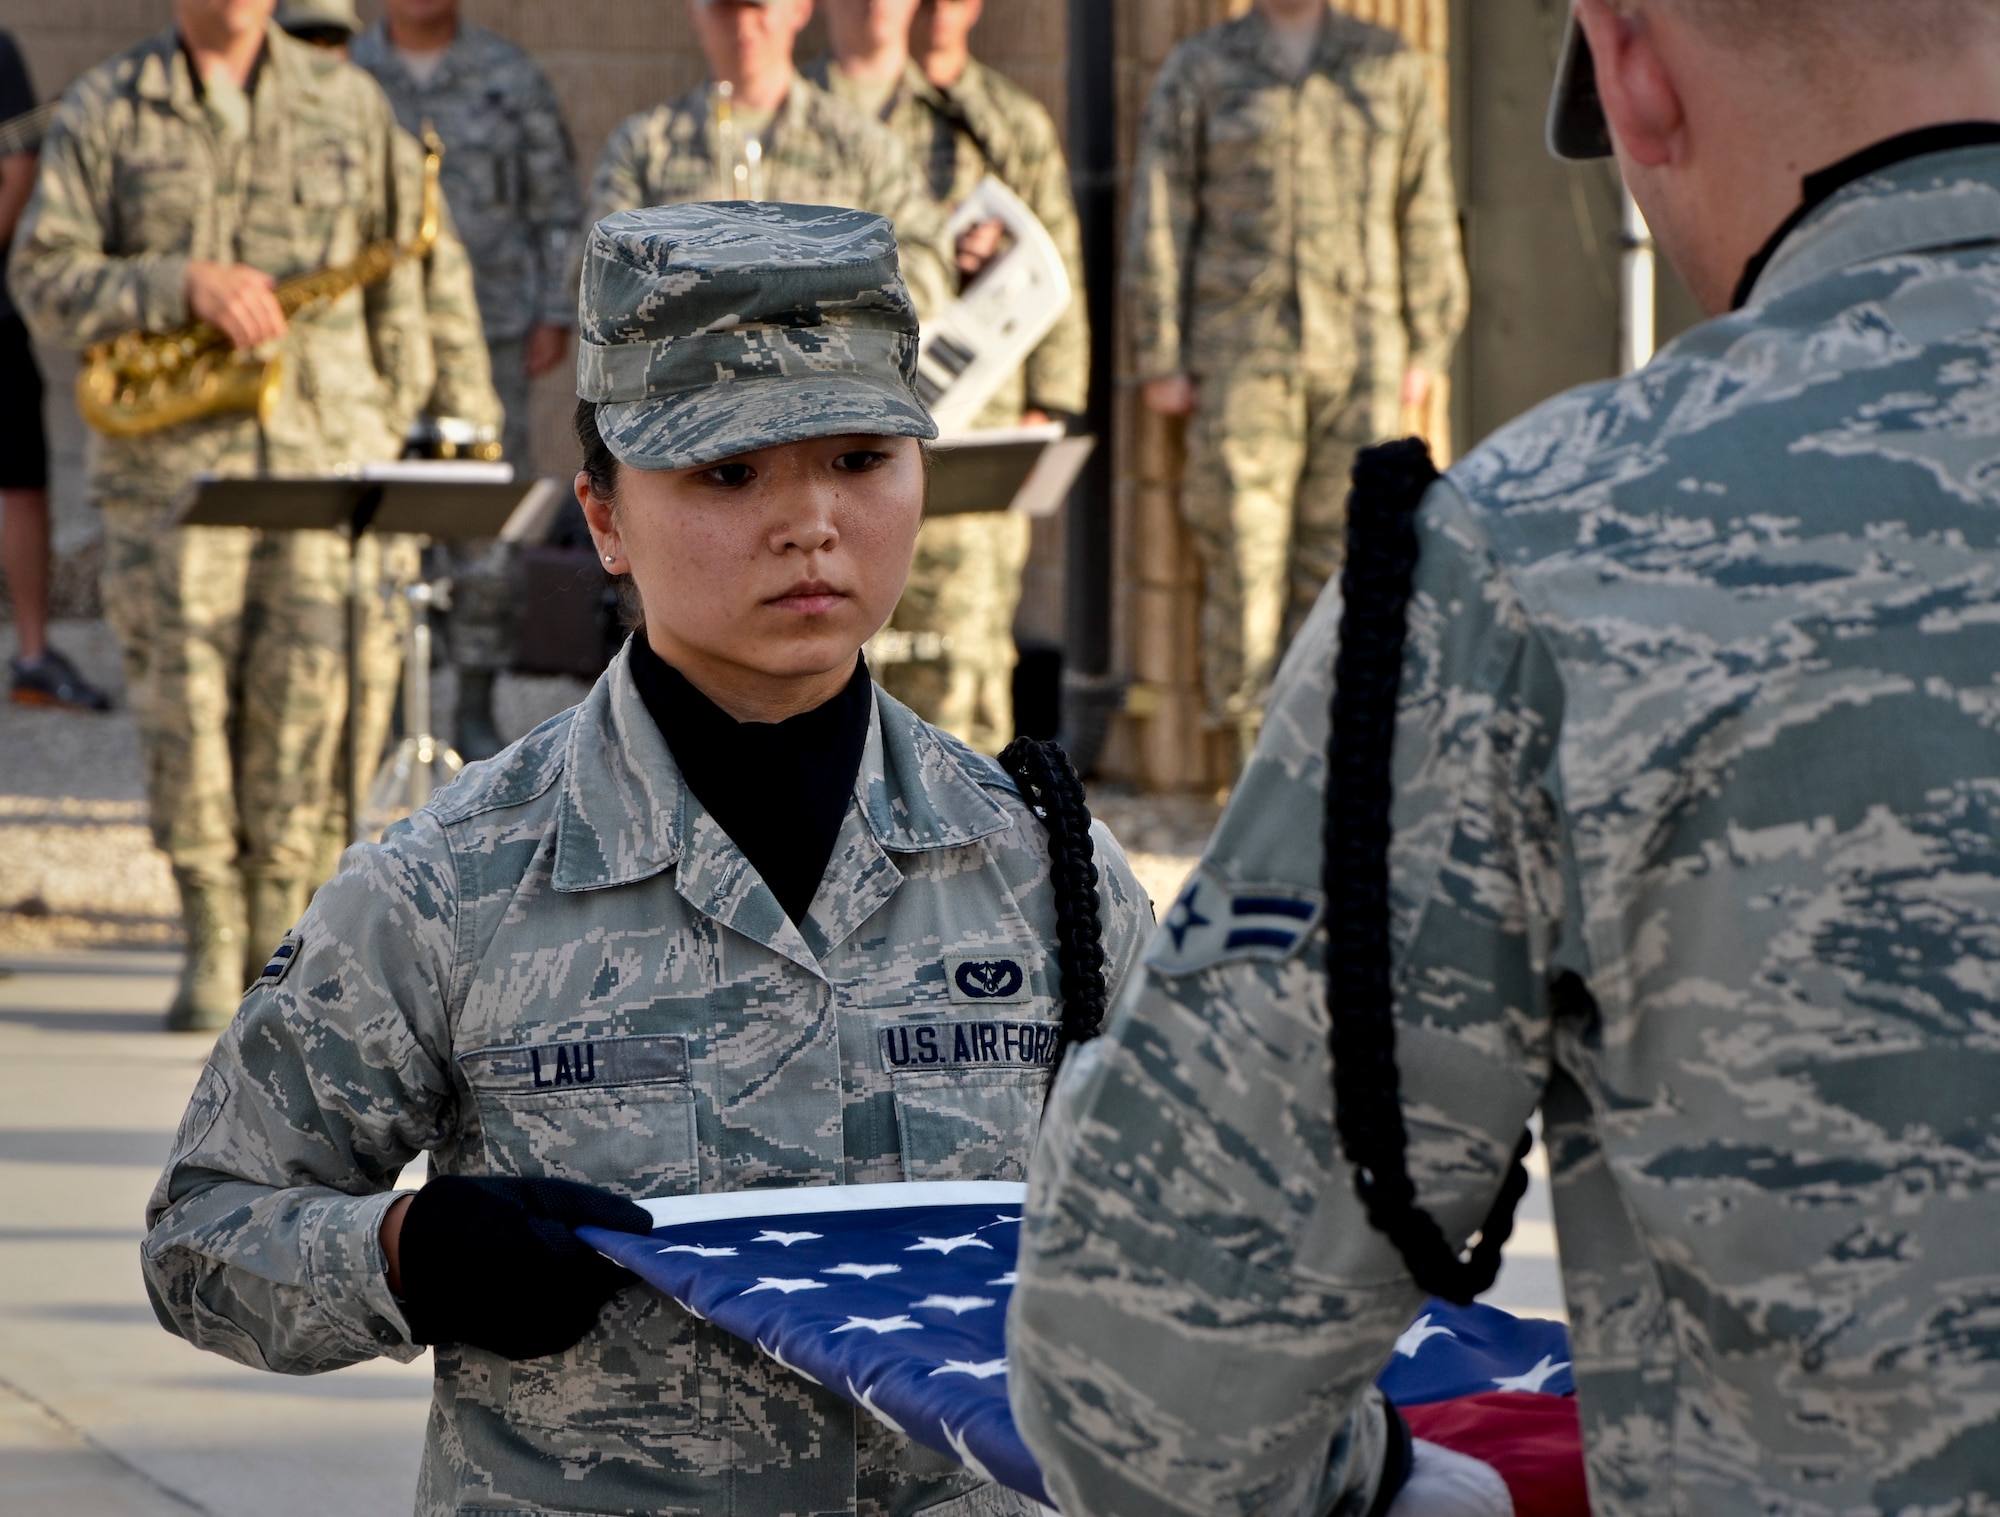 Airmen 1st Class Lena Lau and Justin Grahn fold the American flag during a Memorial Day retreat ceremony, May 27, 2013, at Memorial Plaza in Southwest Asia. Lau and Grahn are members of the 379th Air Expeditionary Wing honor guard. Military retreat ceremonies serve a twofold purpose: to signal the end of the official duty day and to pay respect to the U.S. flag. (U.S. Air Force photo/Senior Airman Benjamin Stratton)